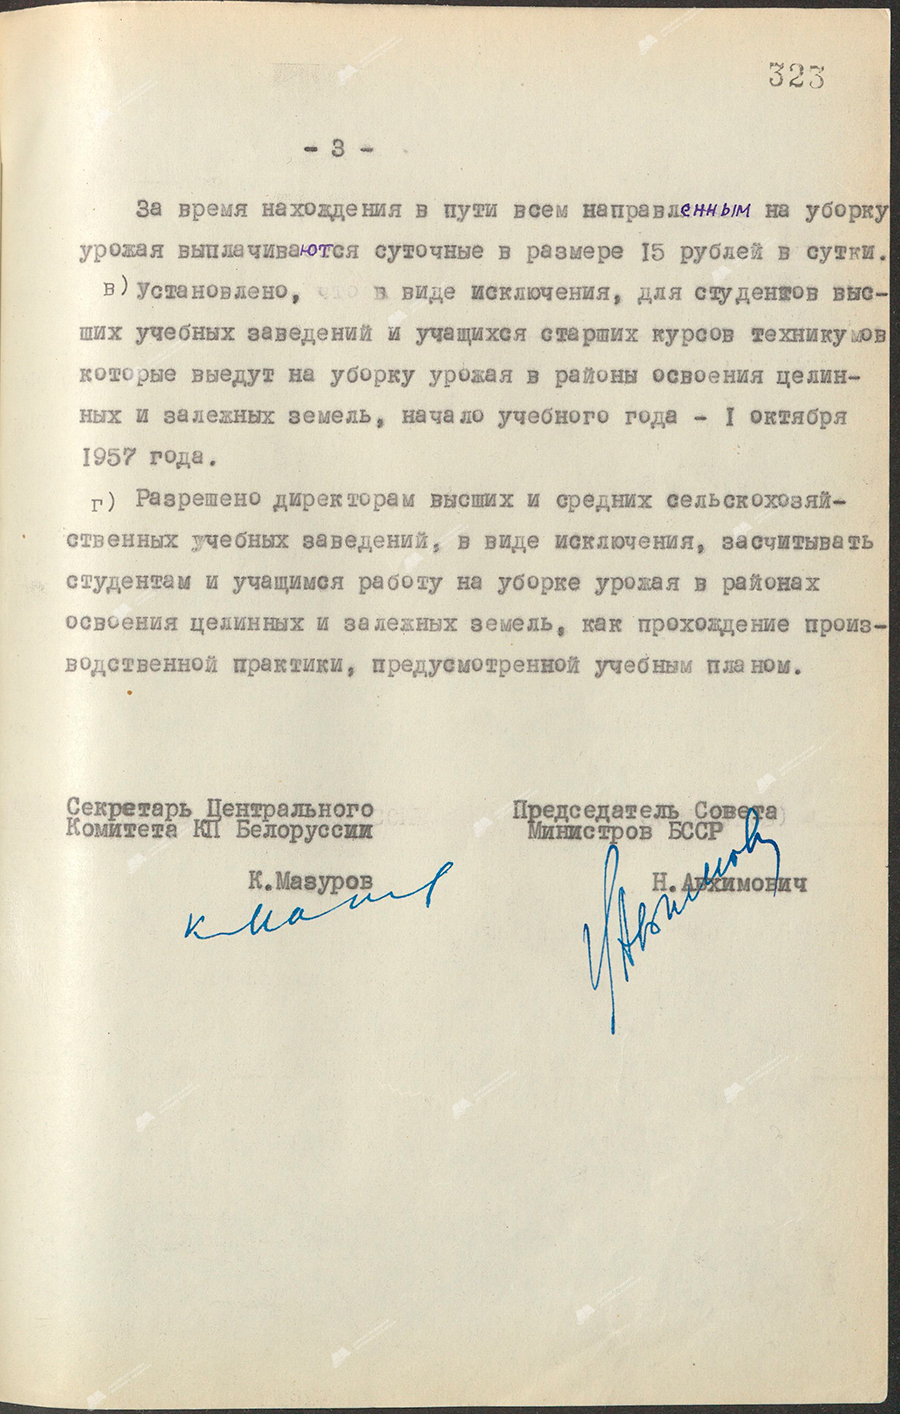 Resolution No. 373 of the Central Committee of the Communist Party of Belarus and the Council of Ministers of the Belarusian SSR «On the participation of Komsomol members and youth of the republic in harvesting in areas of development of virgin and fallow lands in 1957»-с. 2